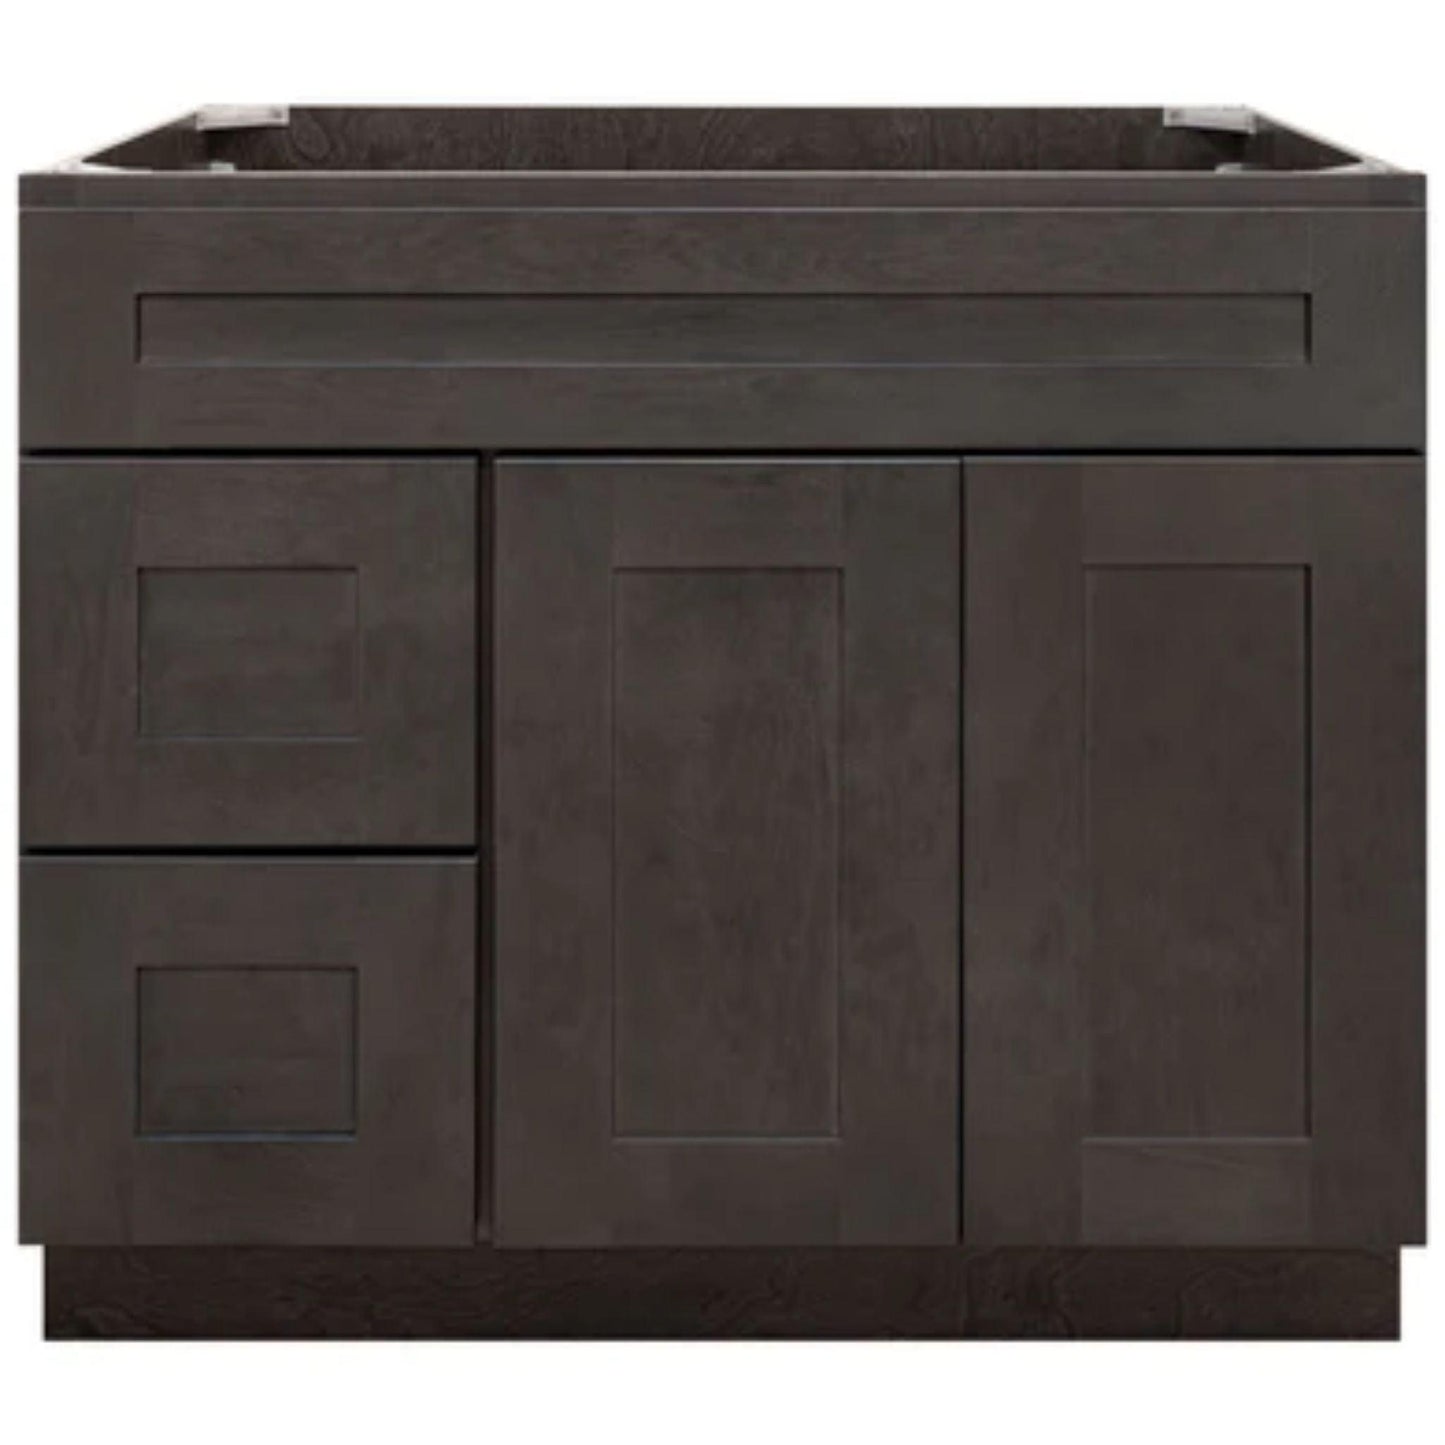 LessCare 30" x 21" x 34 1/2" Dover Gray Vanity Sink Base Cabinet with Left Drawers